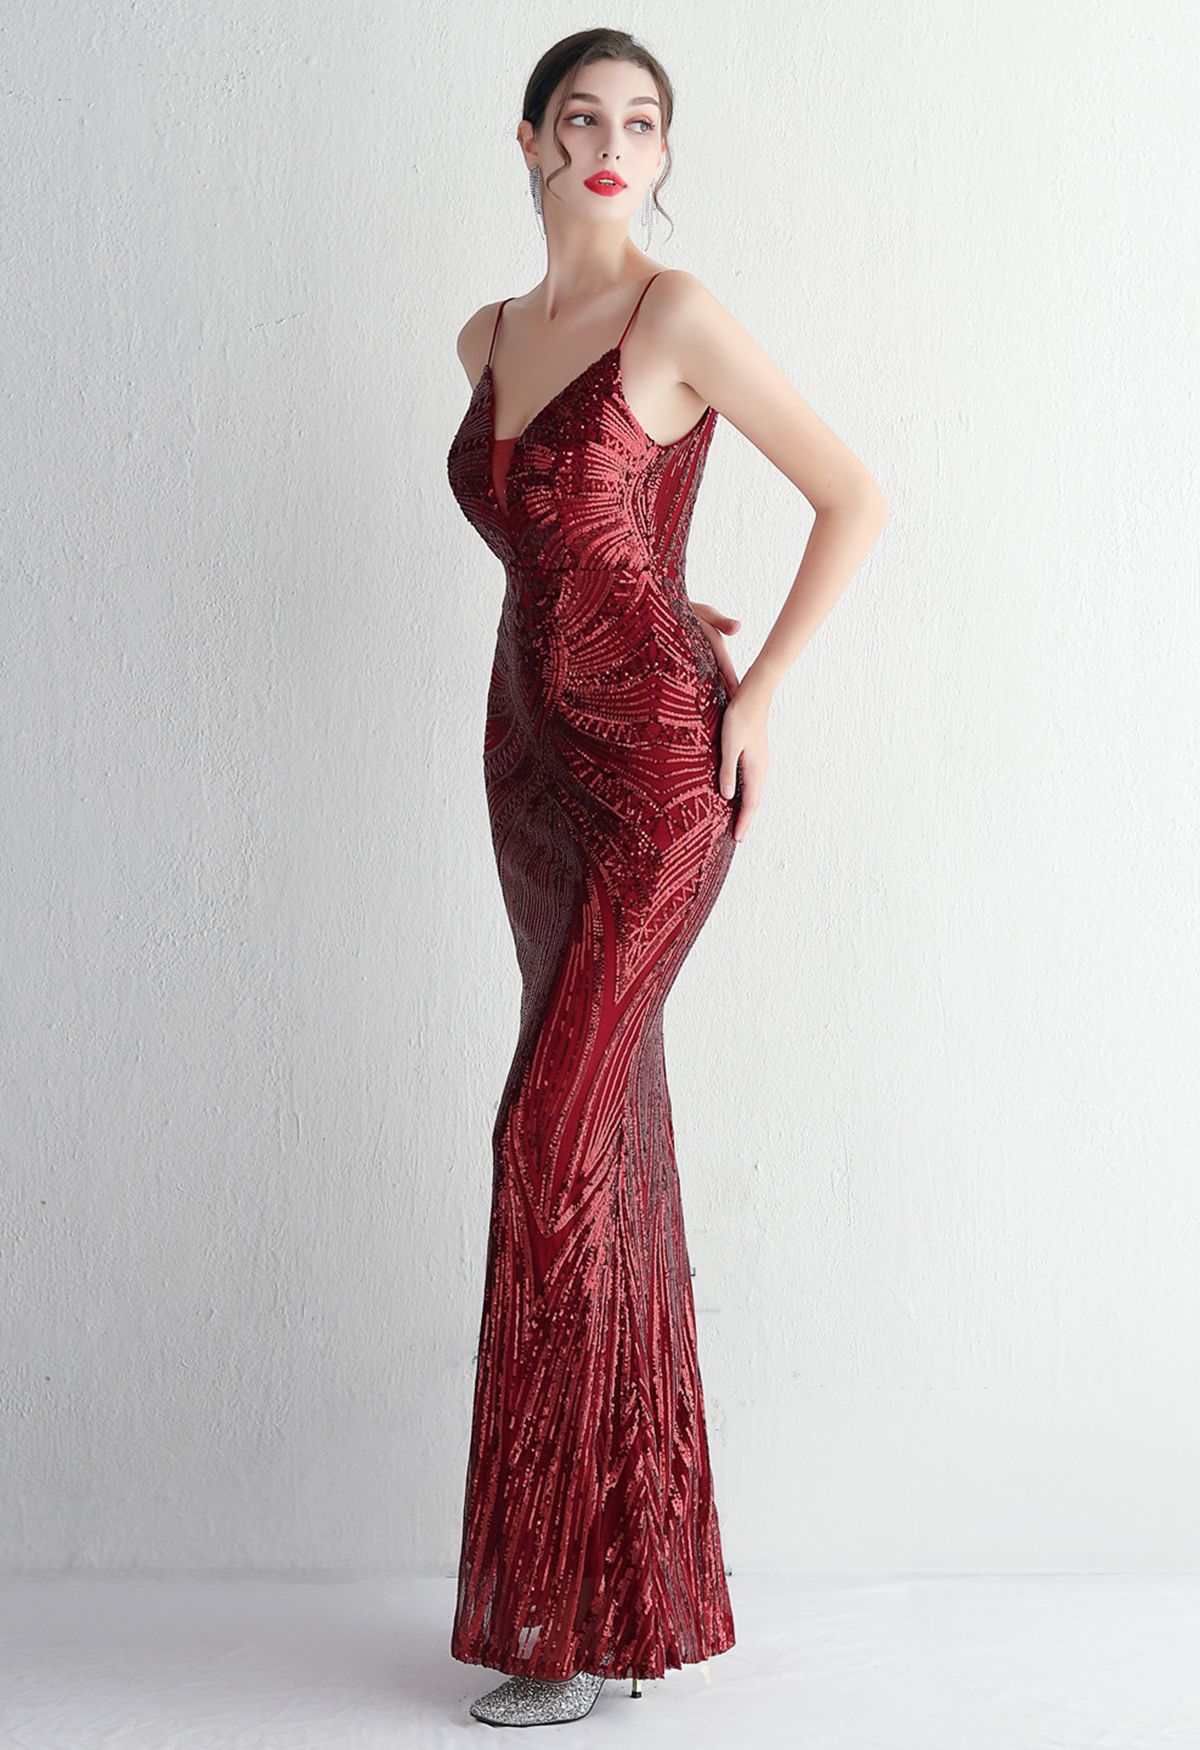 Glimmer Sequin Mermaid Cami Gown in Burgundy - Retro, Indie and Unique ...